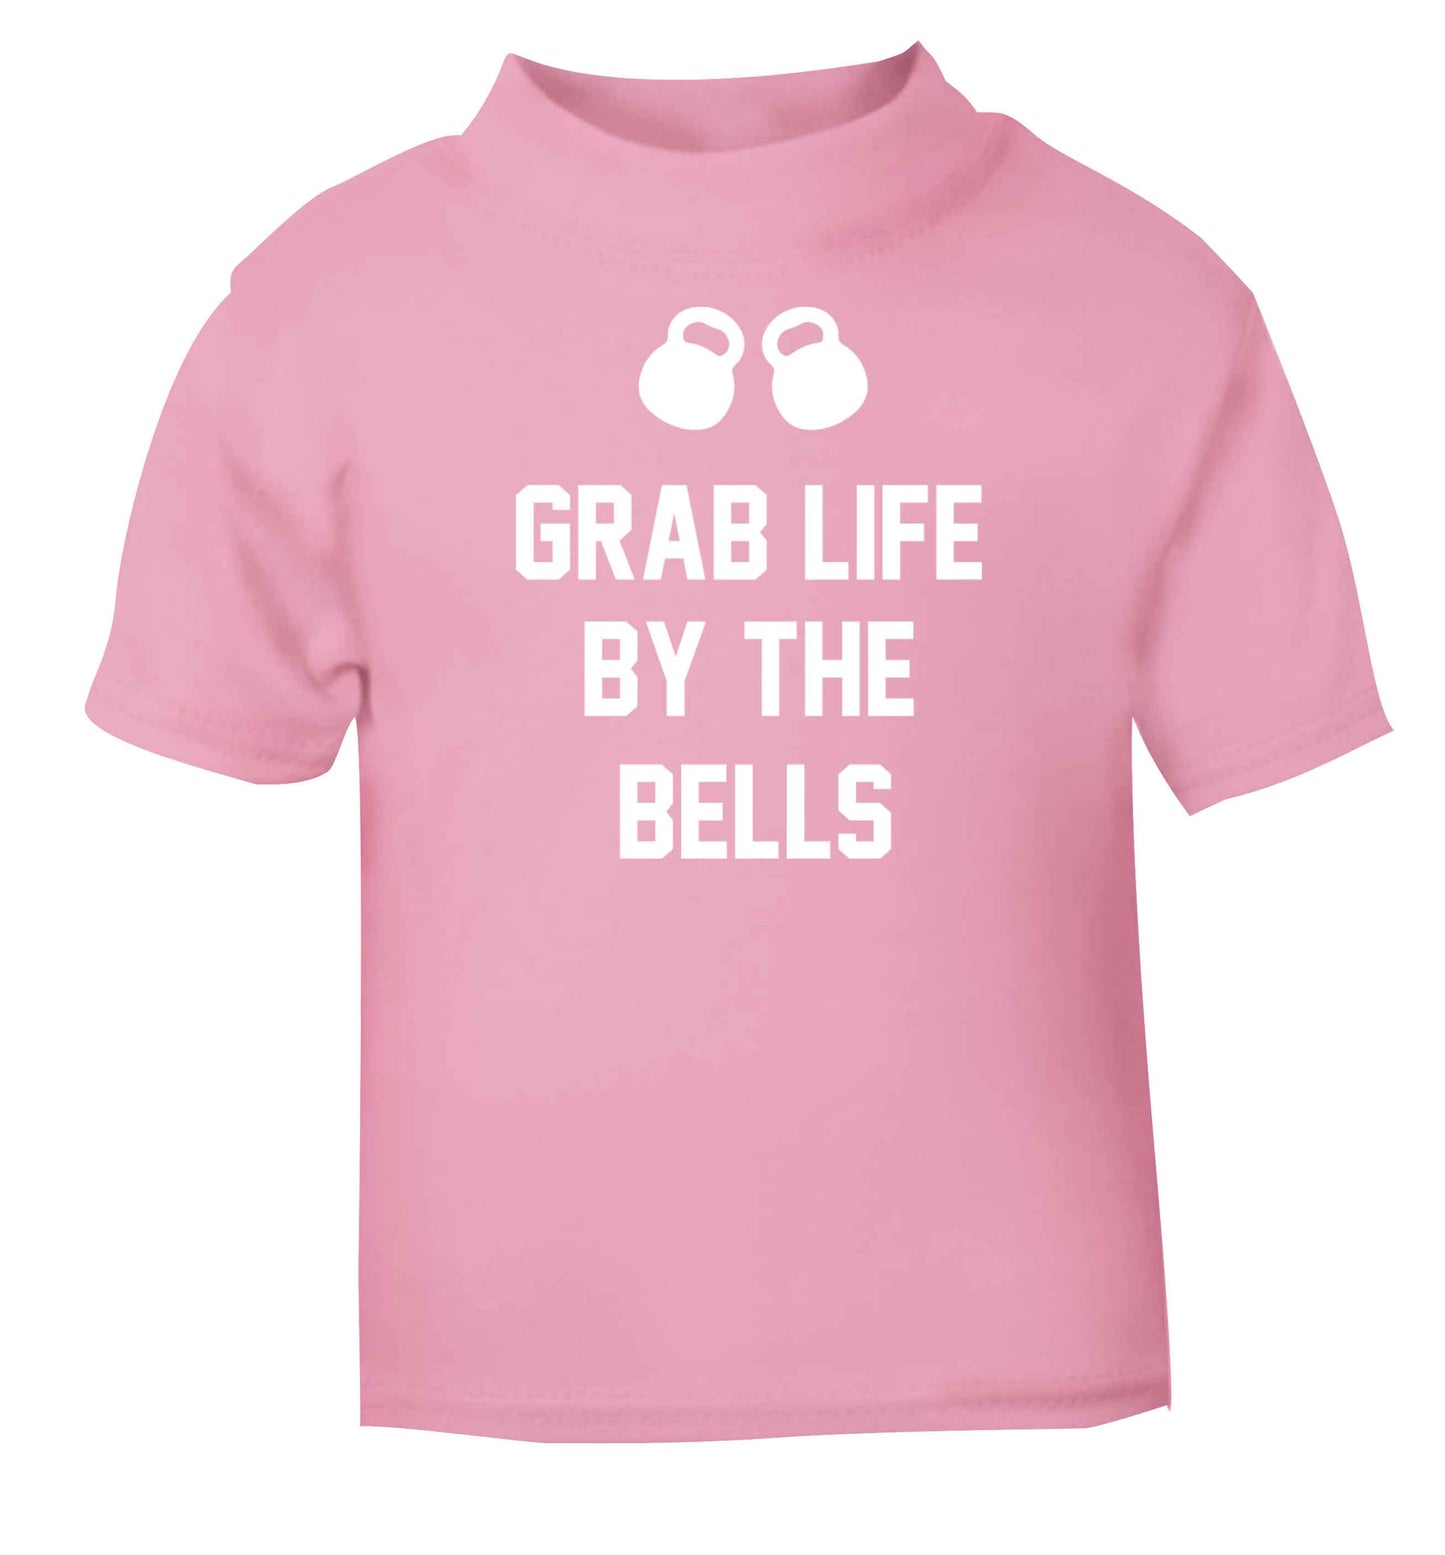 Grab life by the bells light pink baby toddler Tshirt 2 Years